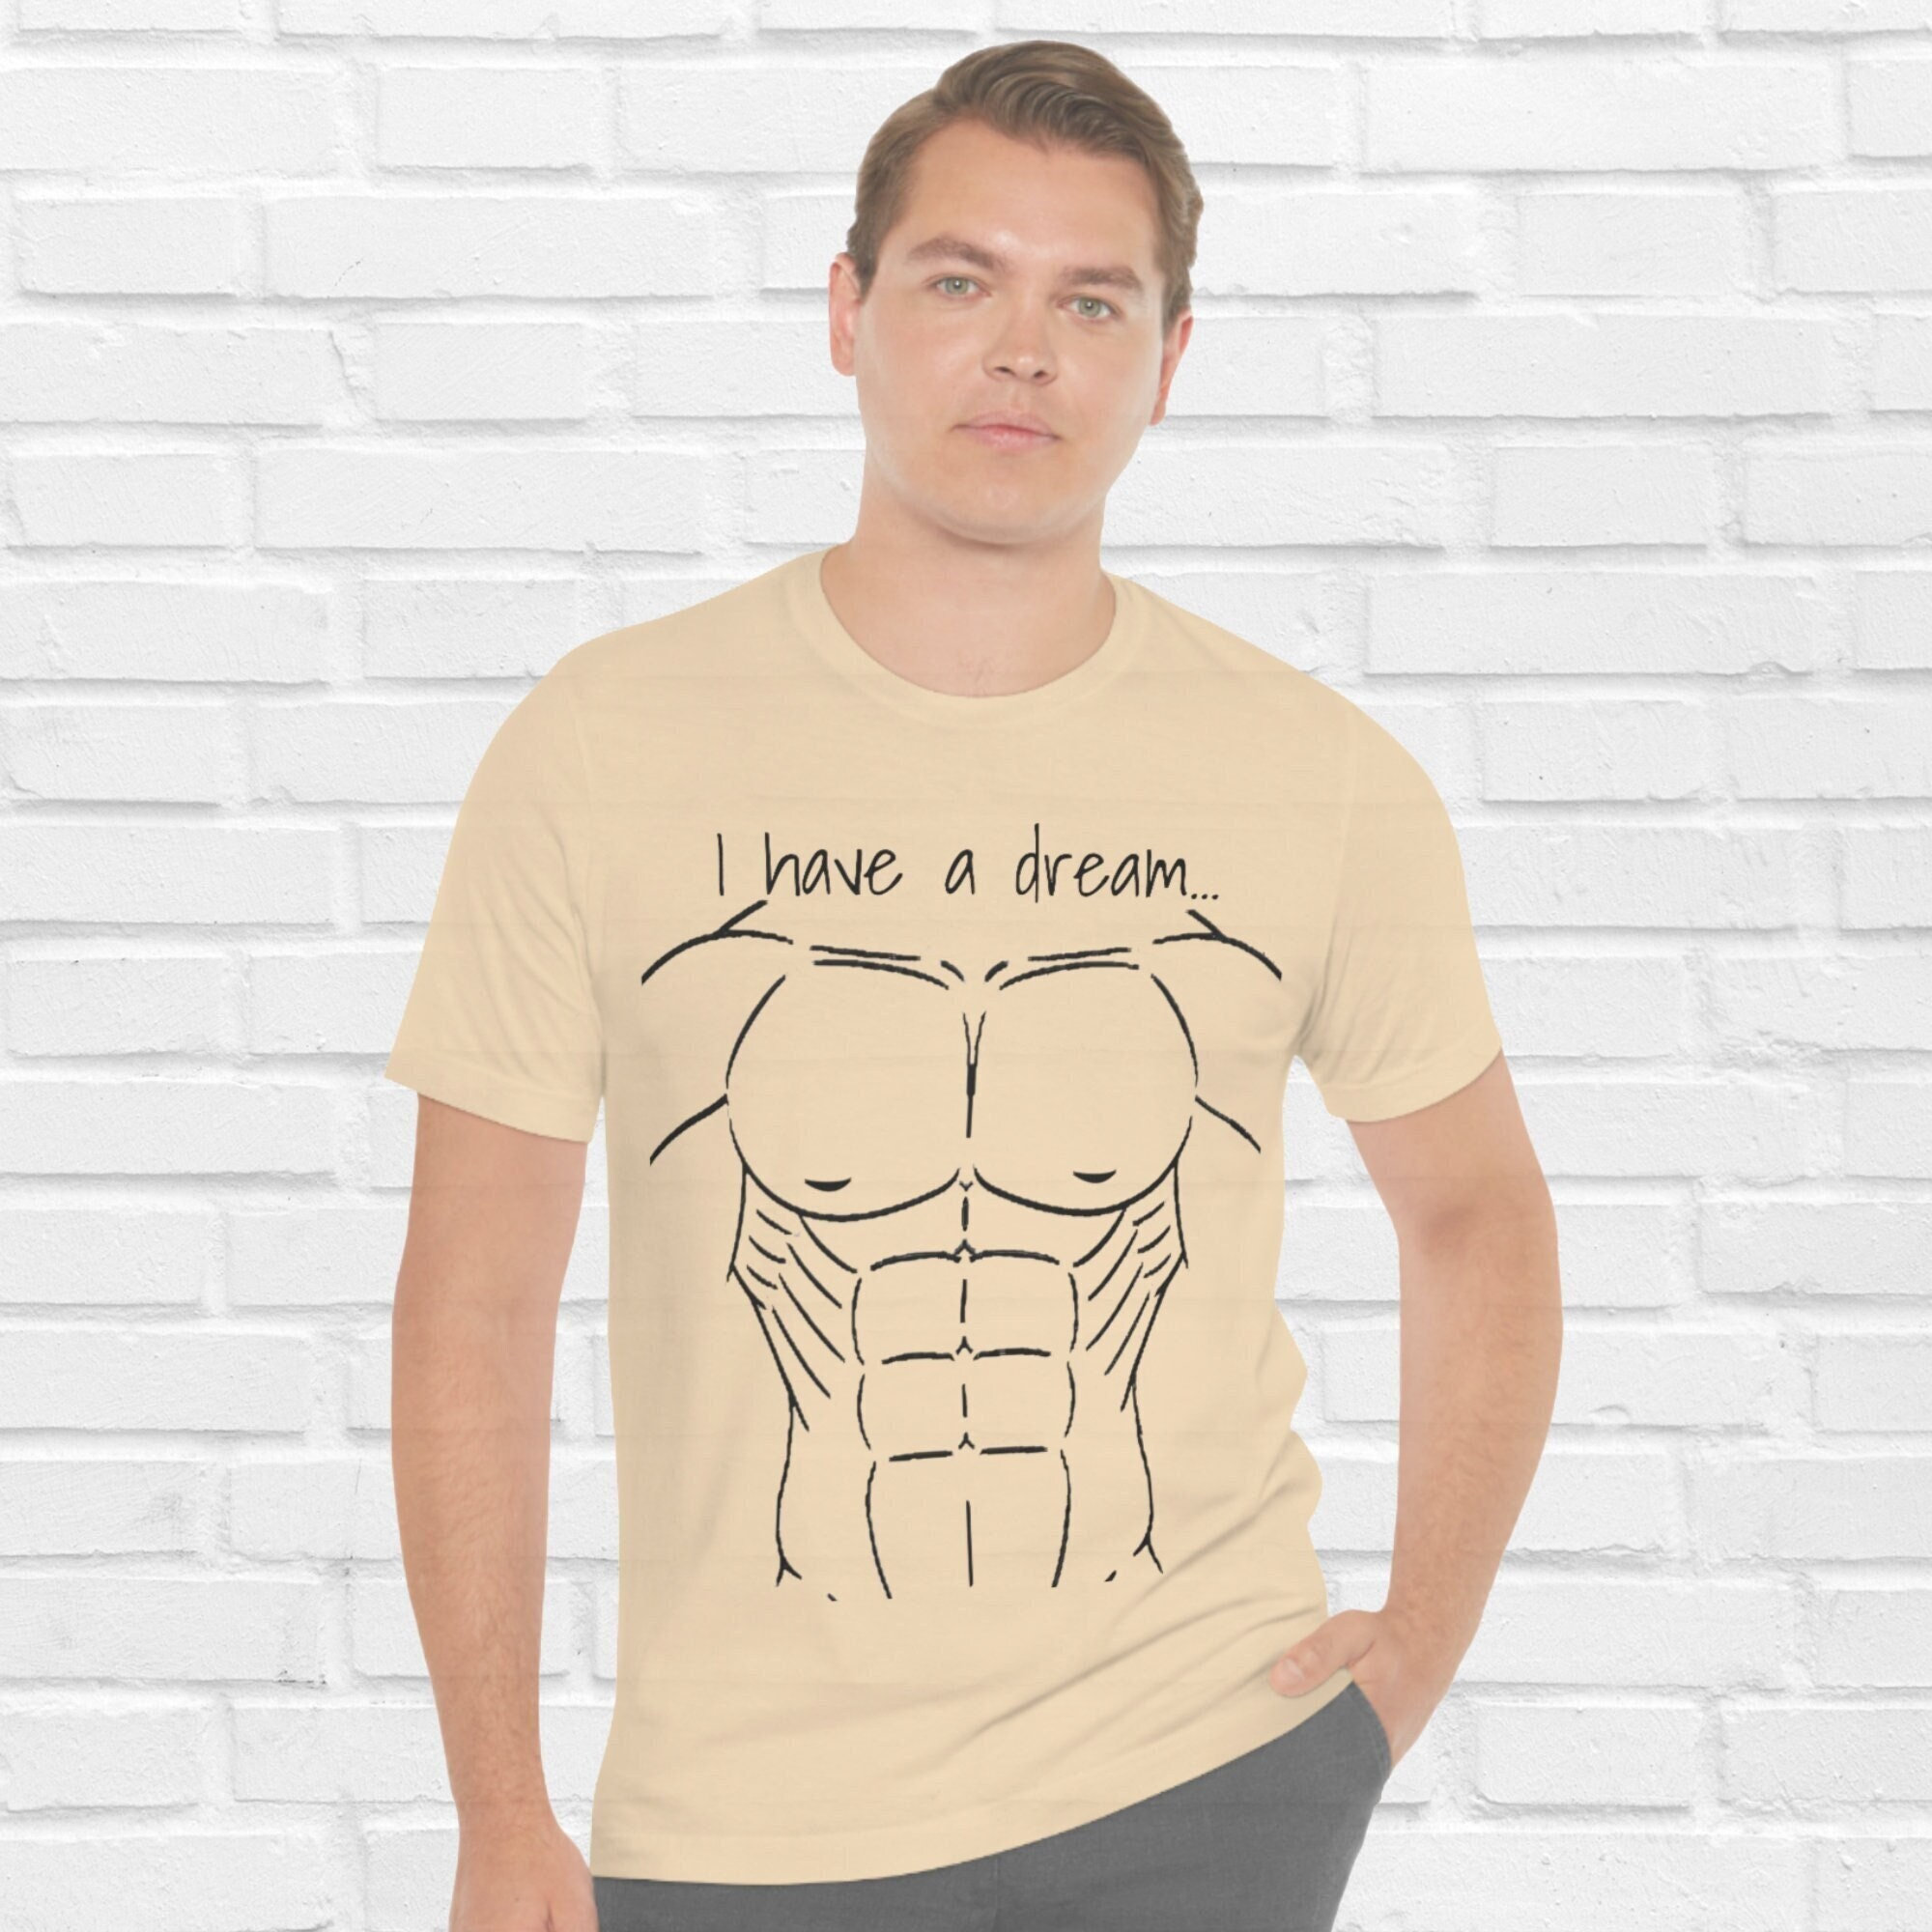 Ripped Muscles, six pack, chest T-shirt Shoulder Bag